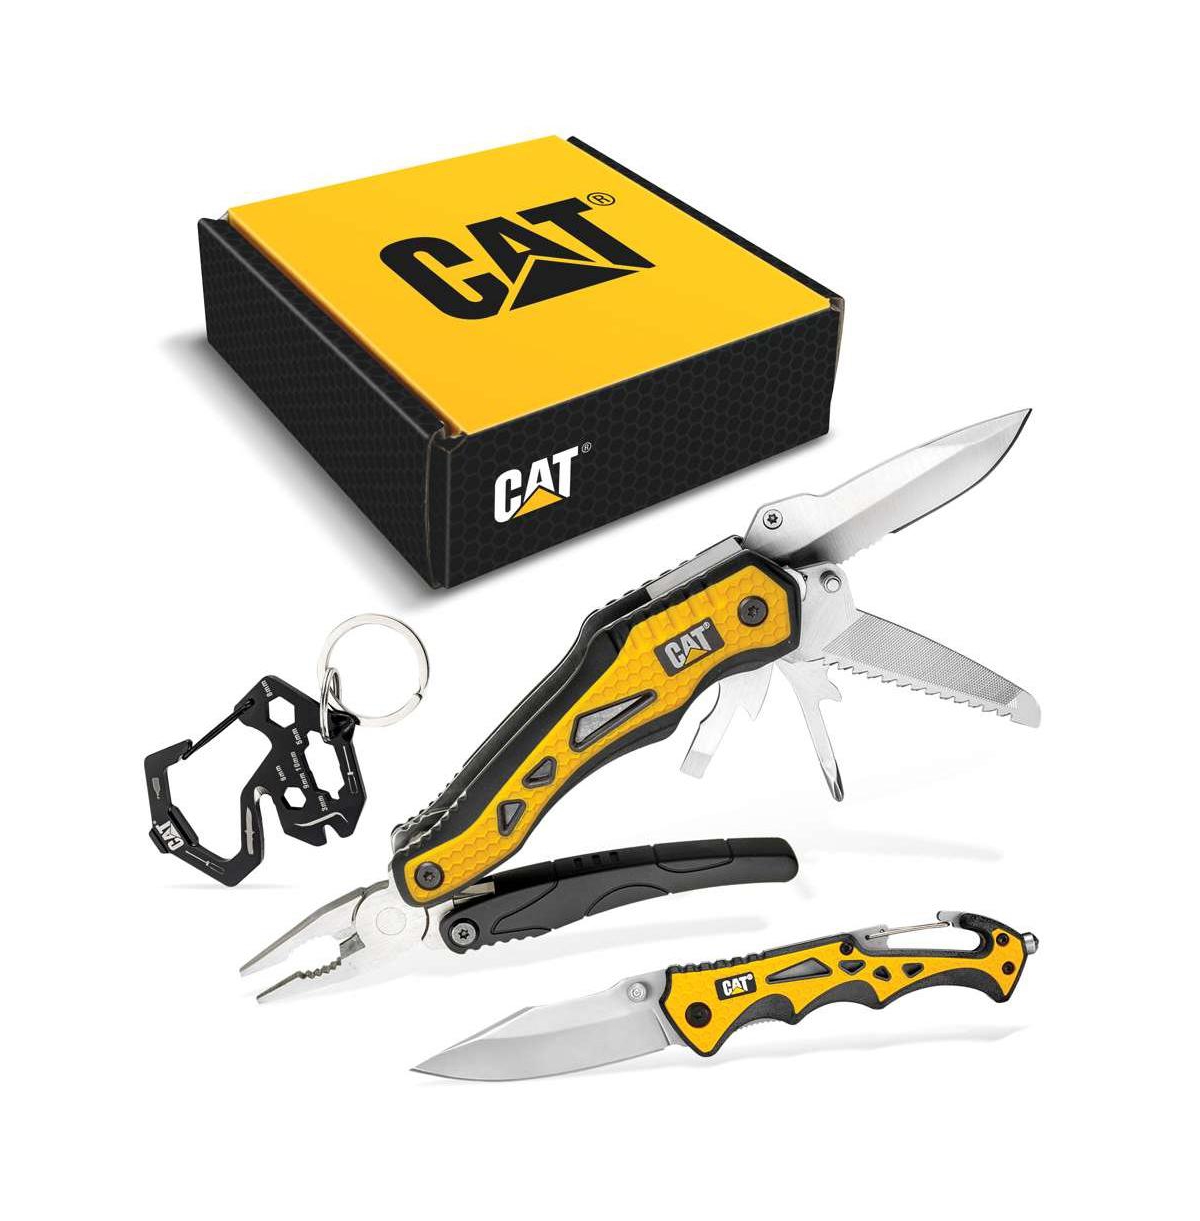 3 Piece 10-in-1 Multi-Tool, Knife, and Key Chain Gift Box Set - Yellow